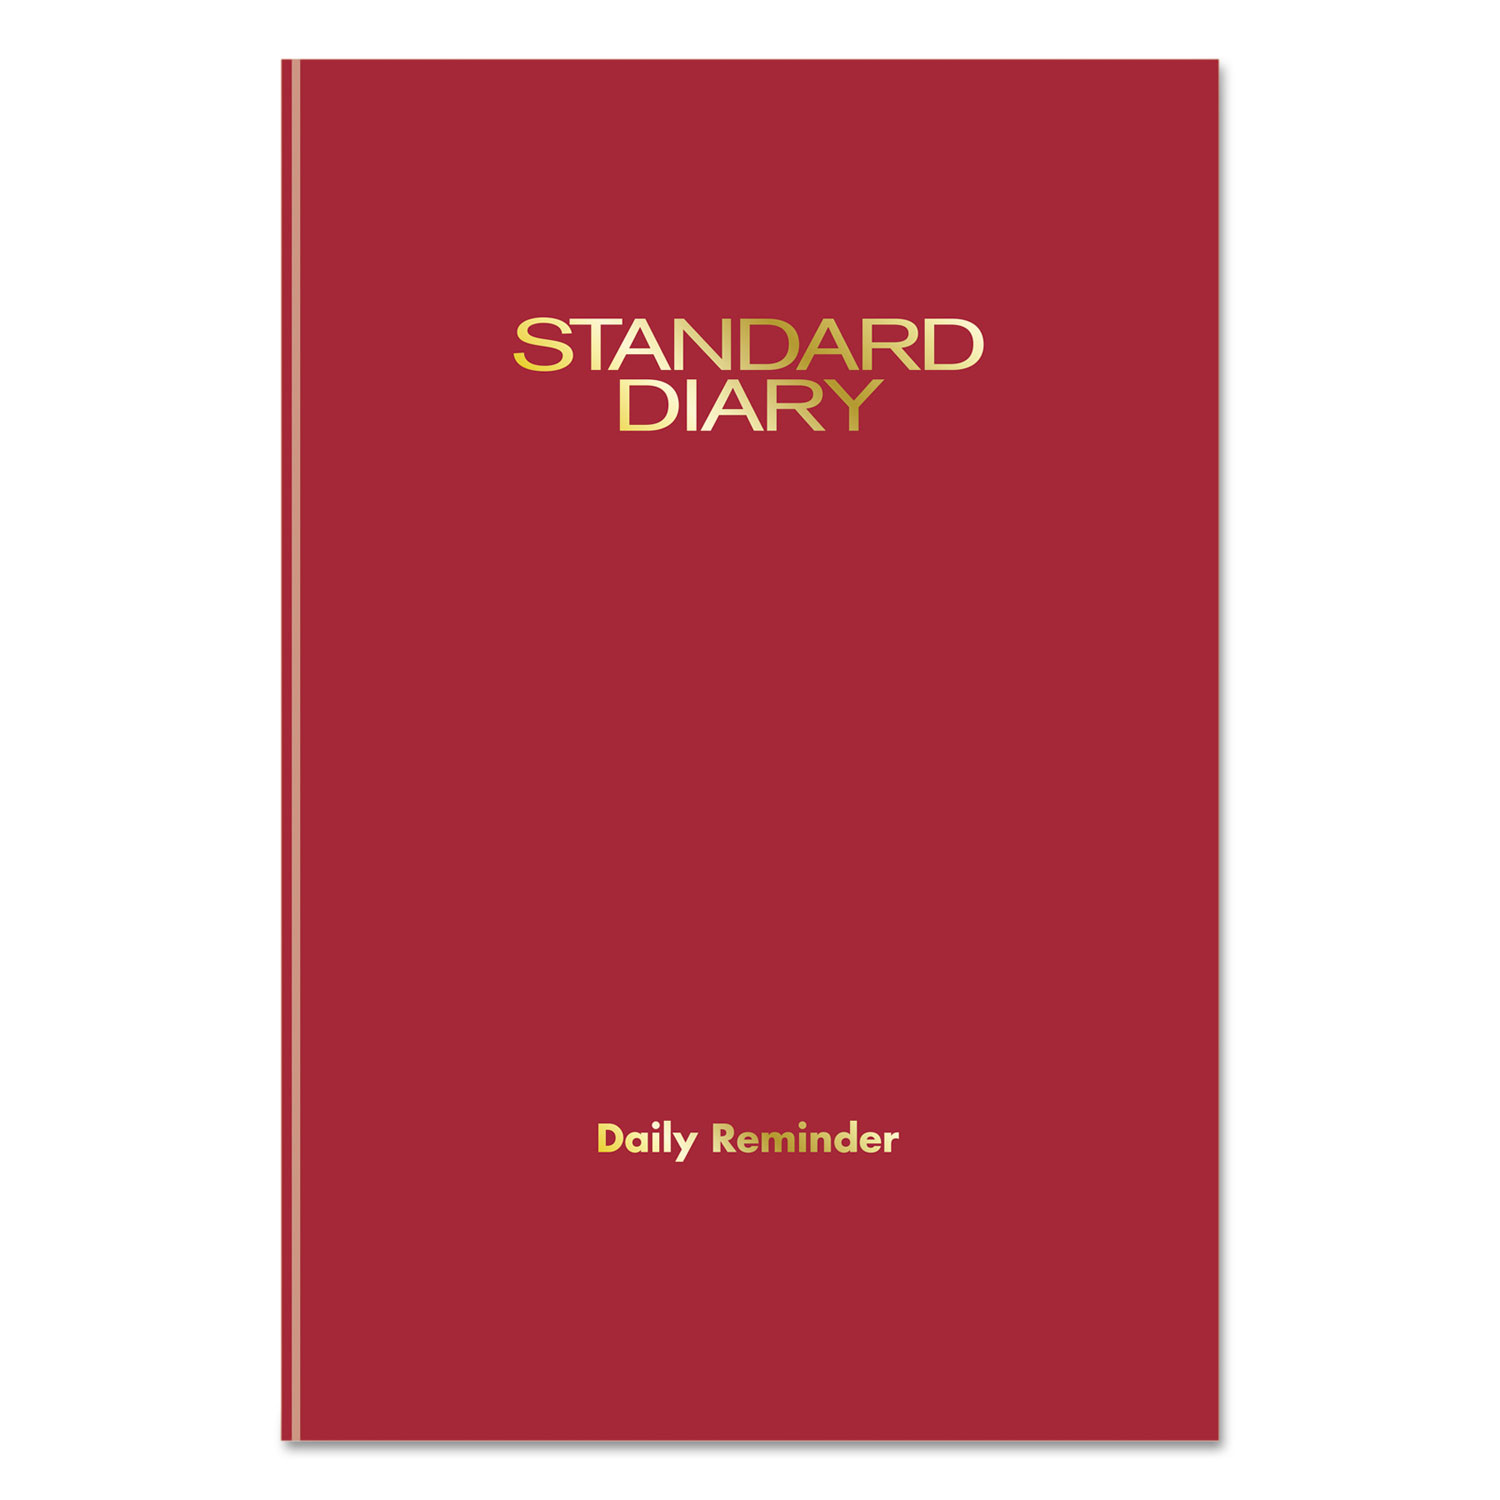 Standard Diary Recycled Daily Reminder, Red, 5 1/8 x 7 1/2, 2018